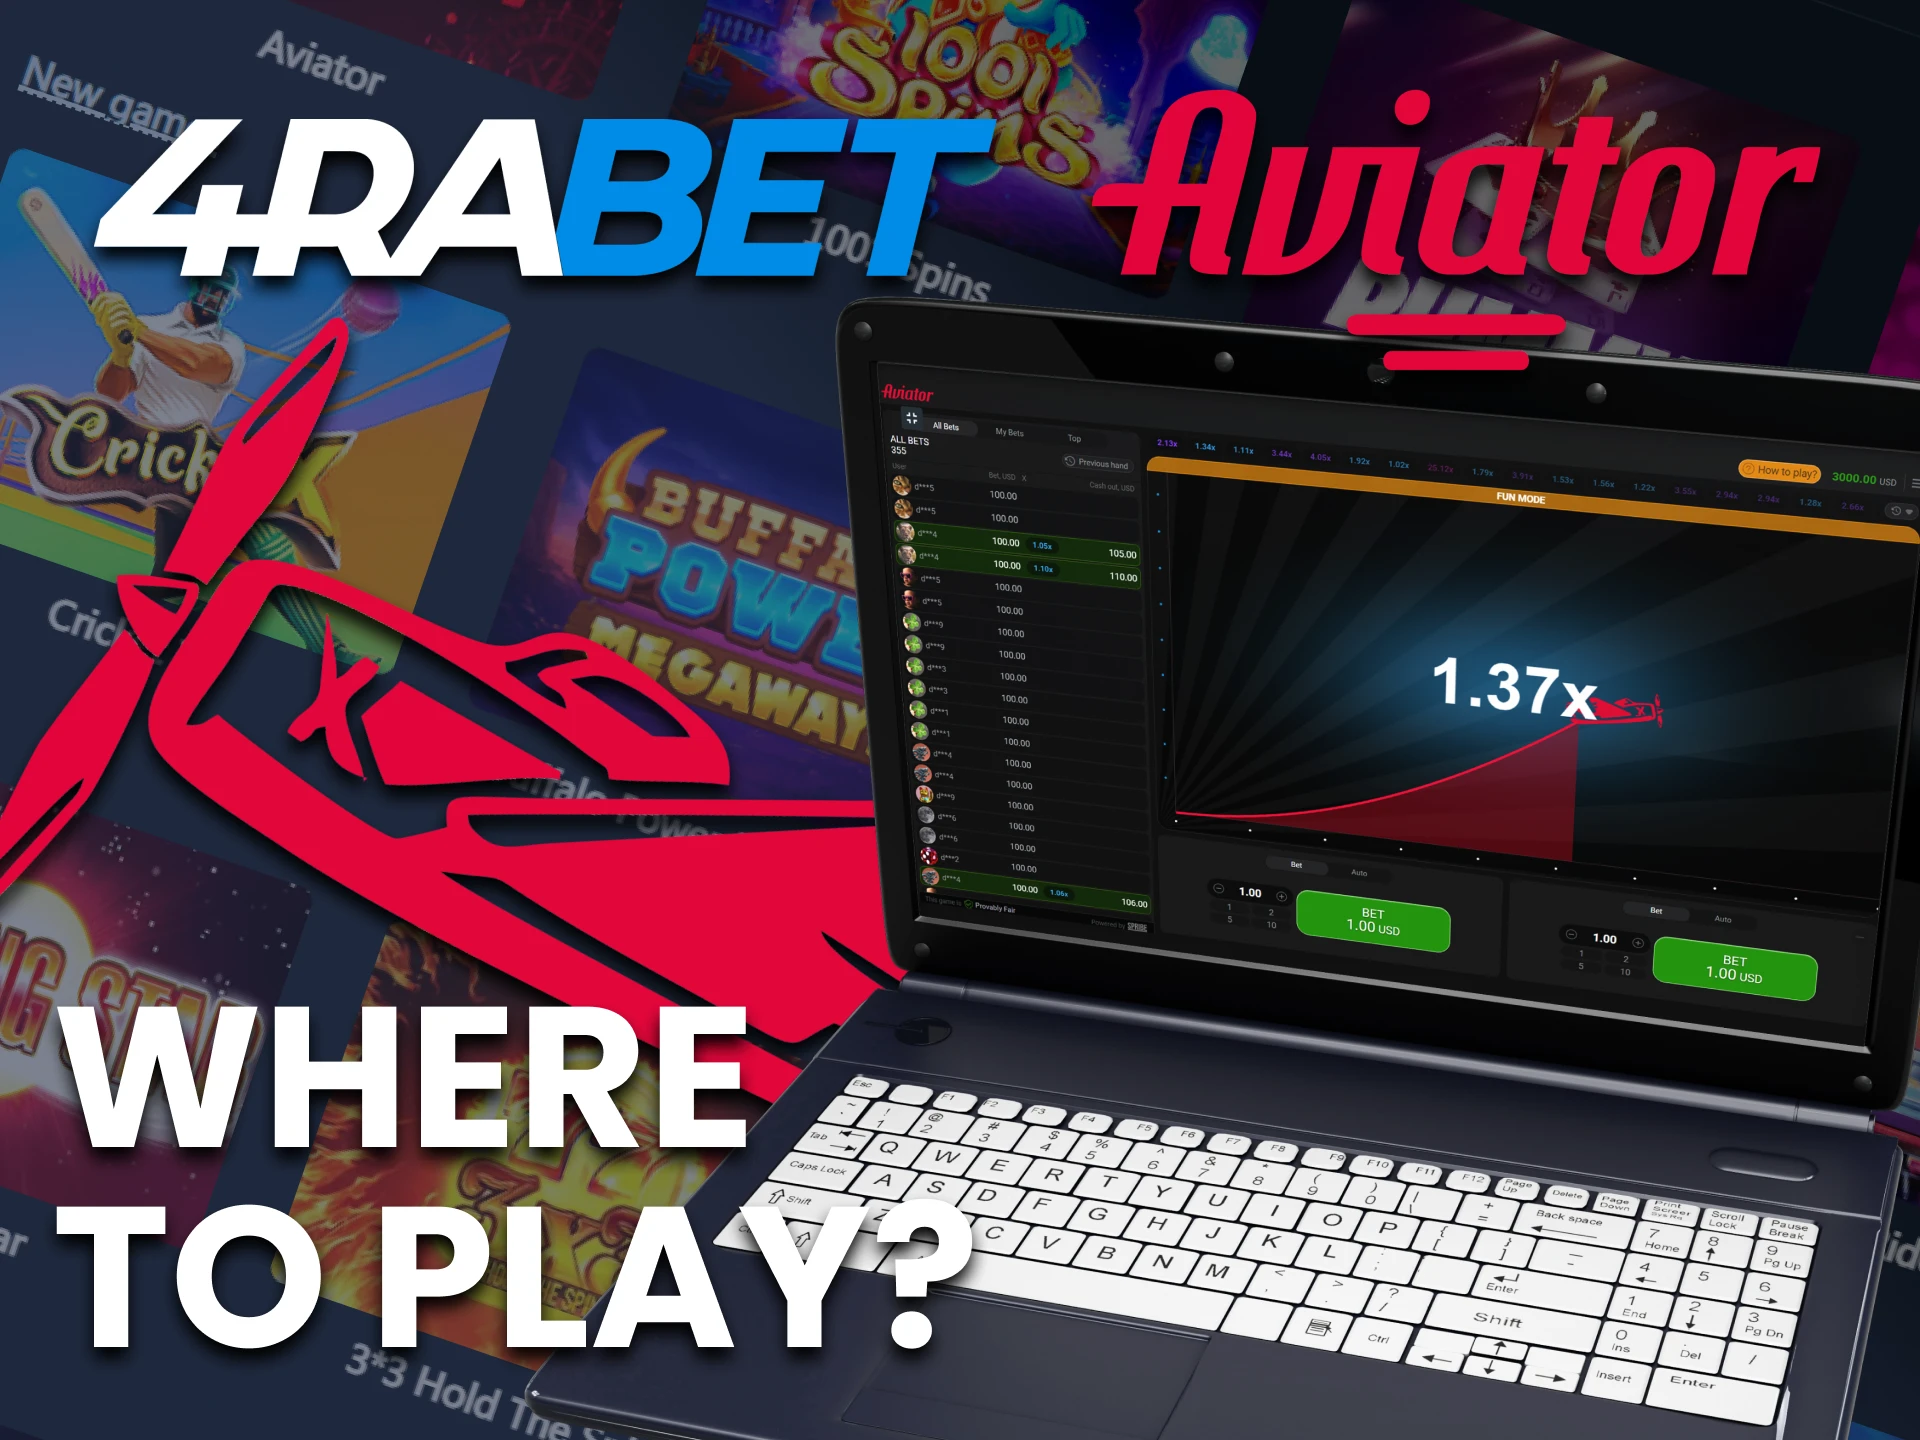 You can play the Aviator game in the 4rabet online casino section.